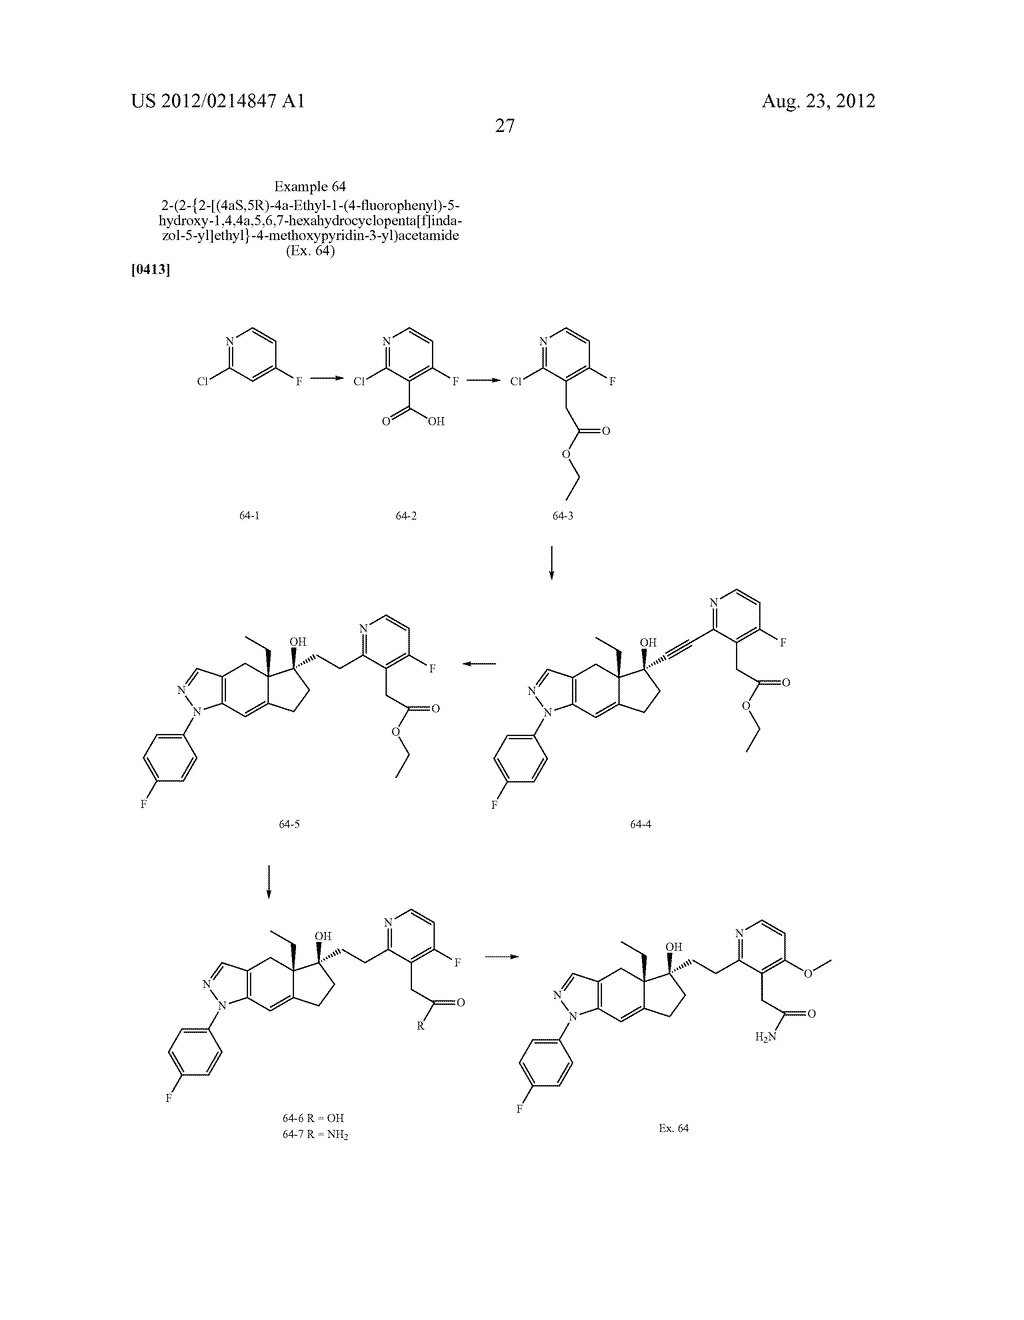 2-[1-PHENYL-5-HYDROXY-4a-SUBSTITUTED-HEXAHYDROCYCLOPENTA[F]INDAZOL-5-YL]ET-    HYL PHENYL DERIVATIVES AS GLUCOCORTICOID RECEPTOR LIGANDS - diagram, schematic, and image 28